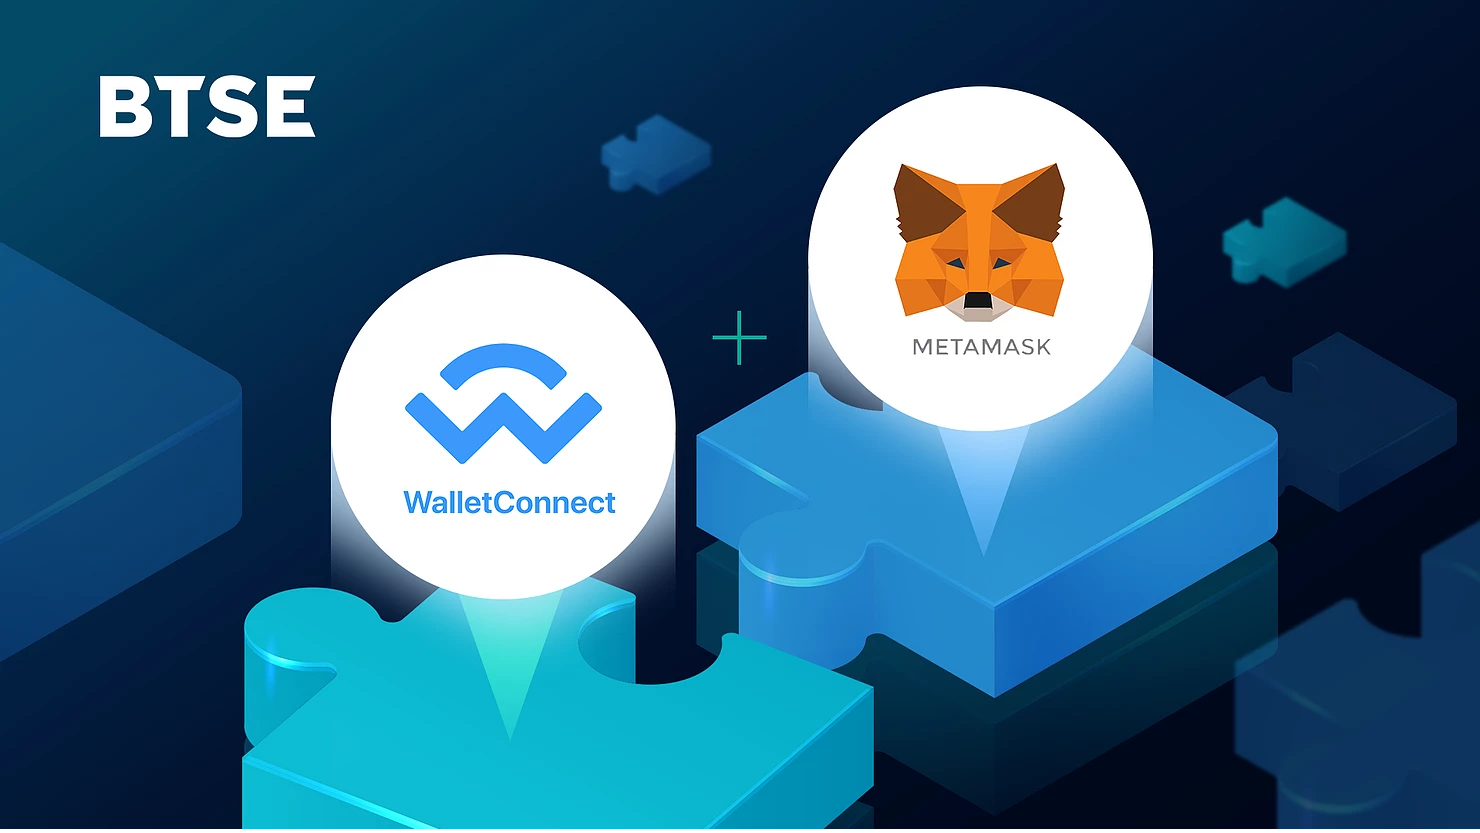 BTSE Launches Joint Integration with MetaMask & WalletConnect